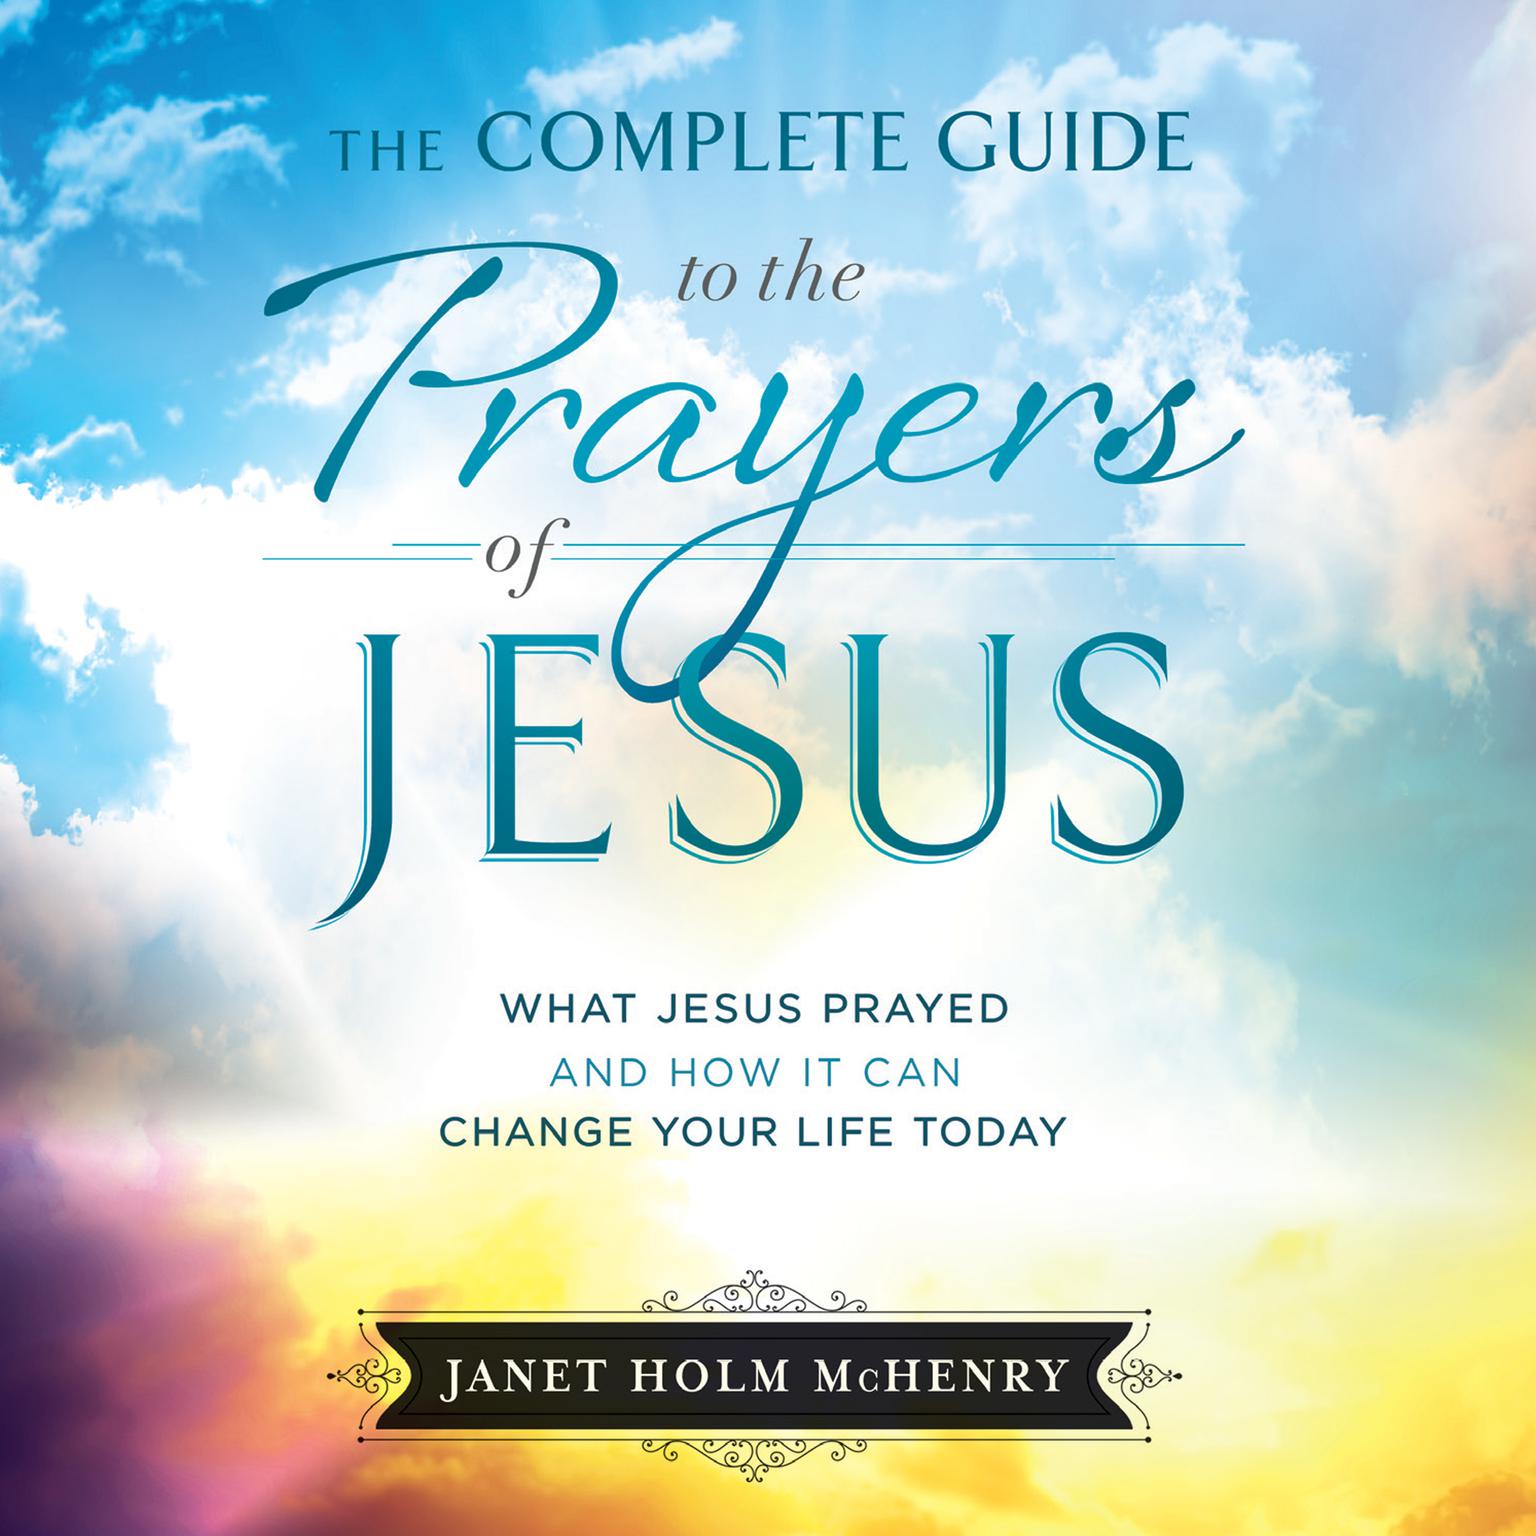 The Complete Guide to the Prayers of Jesus: What Jesus Prayed and How it Can Change Your LIfe Today Audiobook, by Janet Holm McHenry